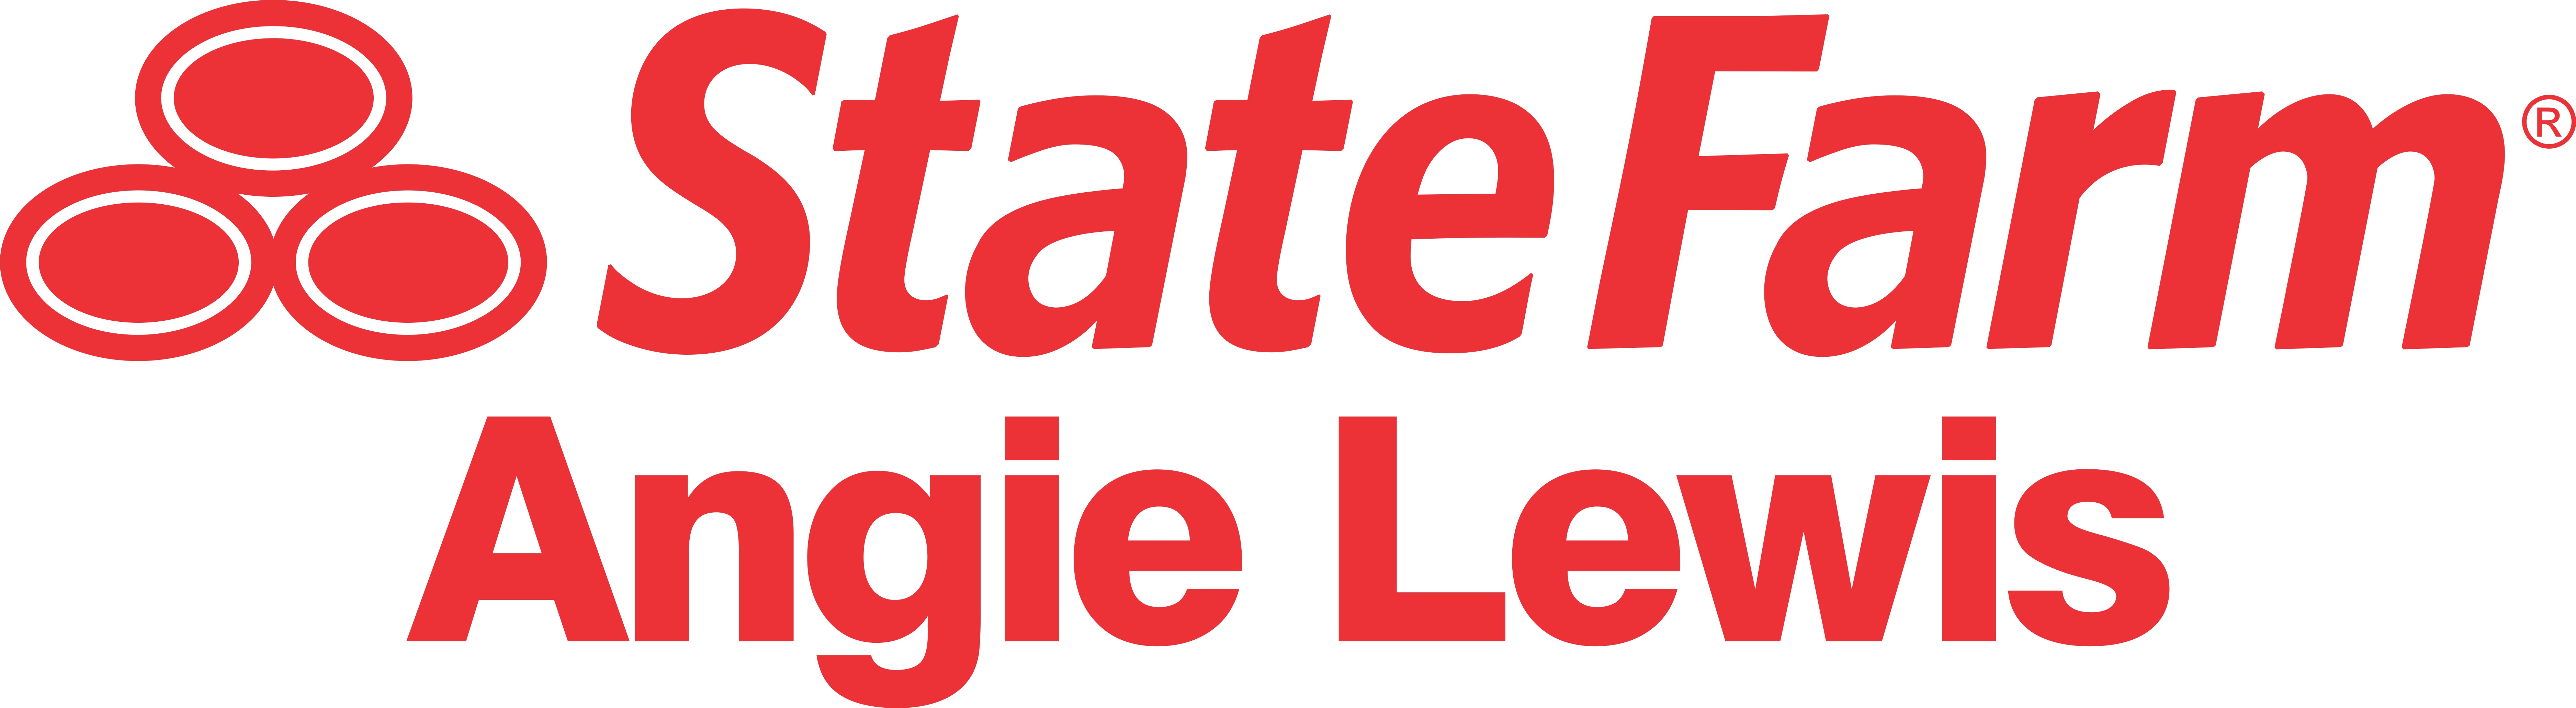 Angie Lewis State Farm